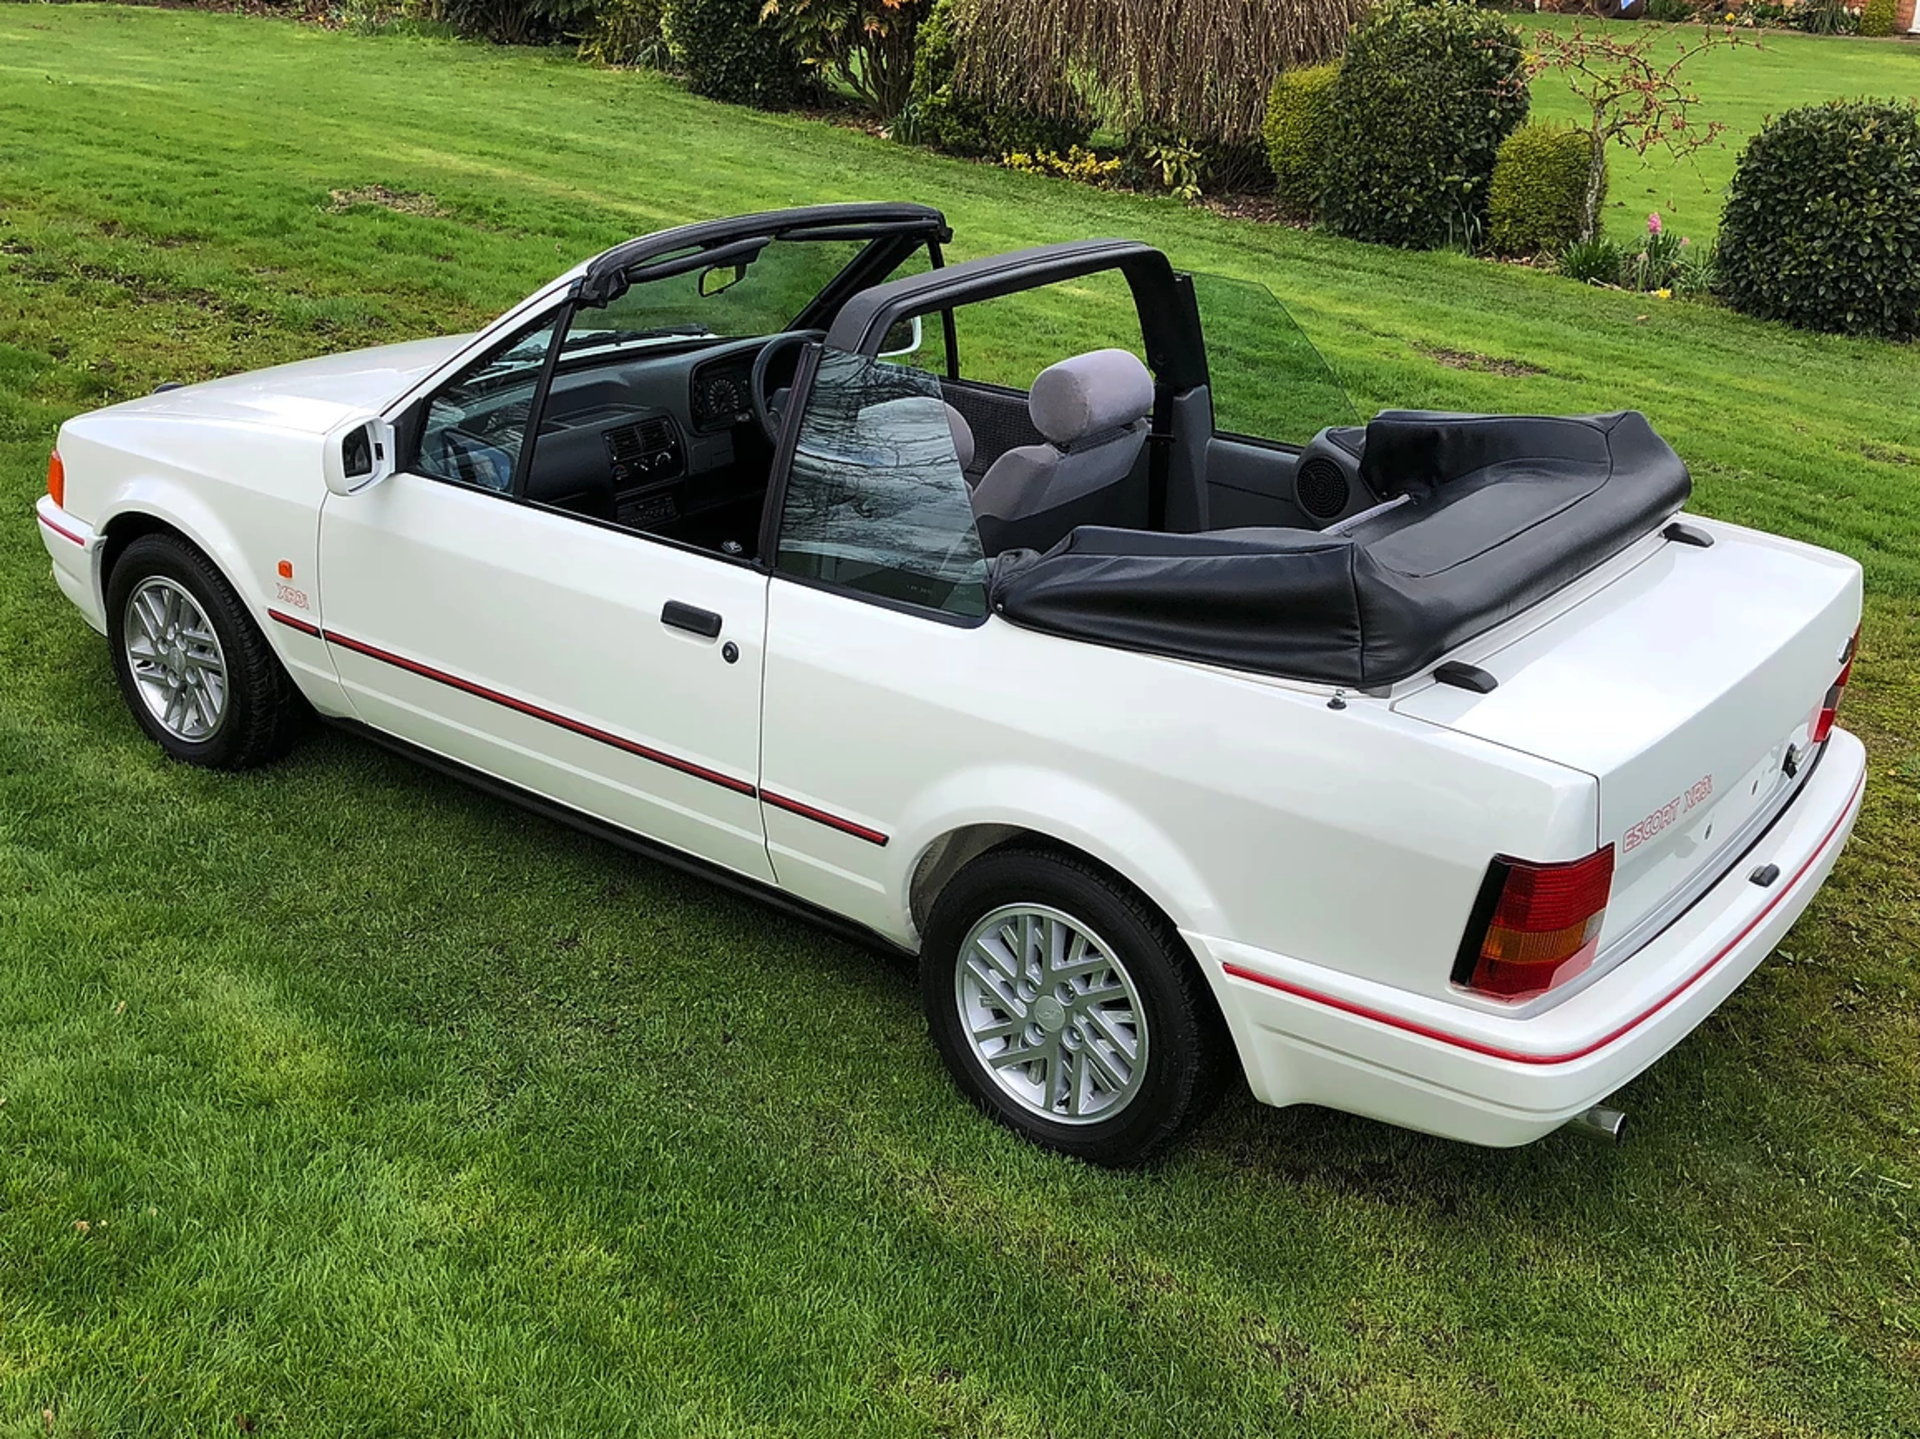 1990 Ford Escort XR3i Convertible - Concours Condition - Image 4 of 12